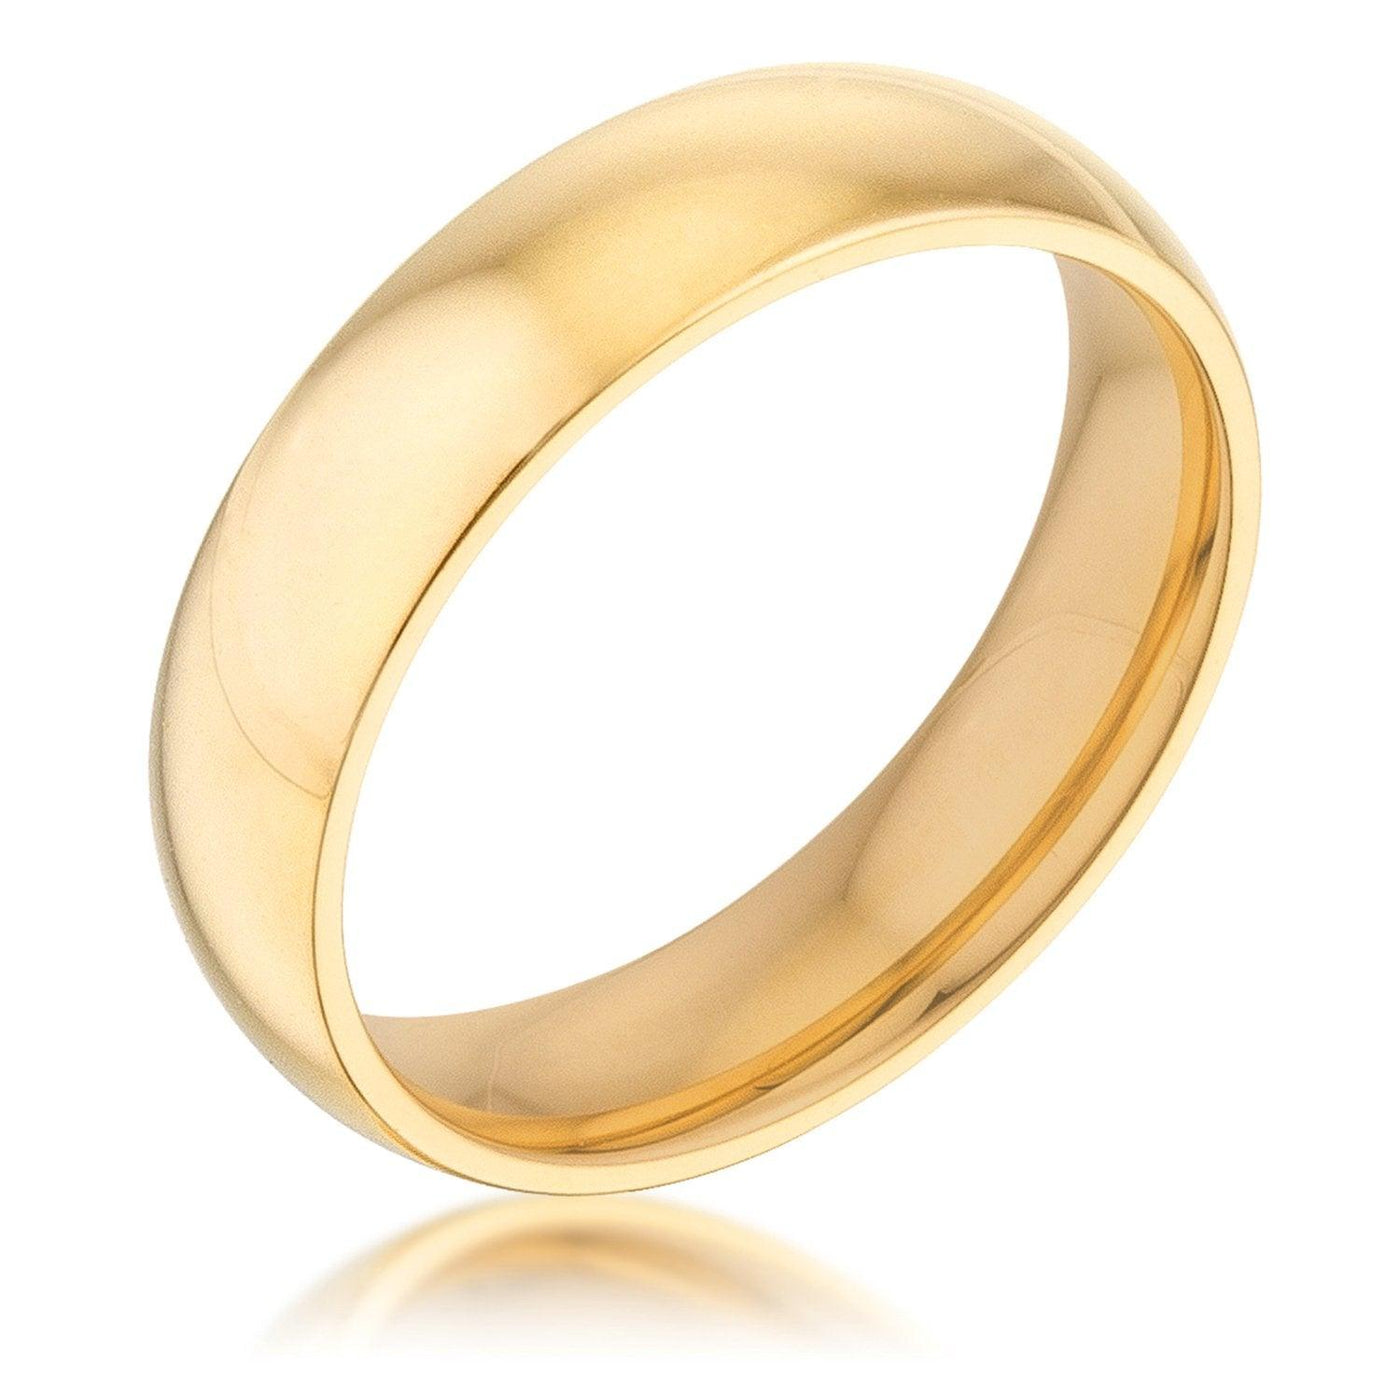 5 mm IPG Gold Stainless Steel Band - AMIClubwear